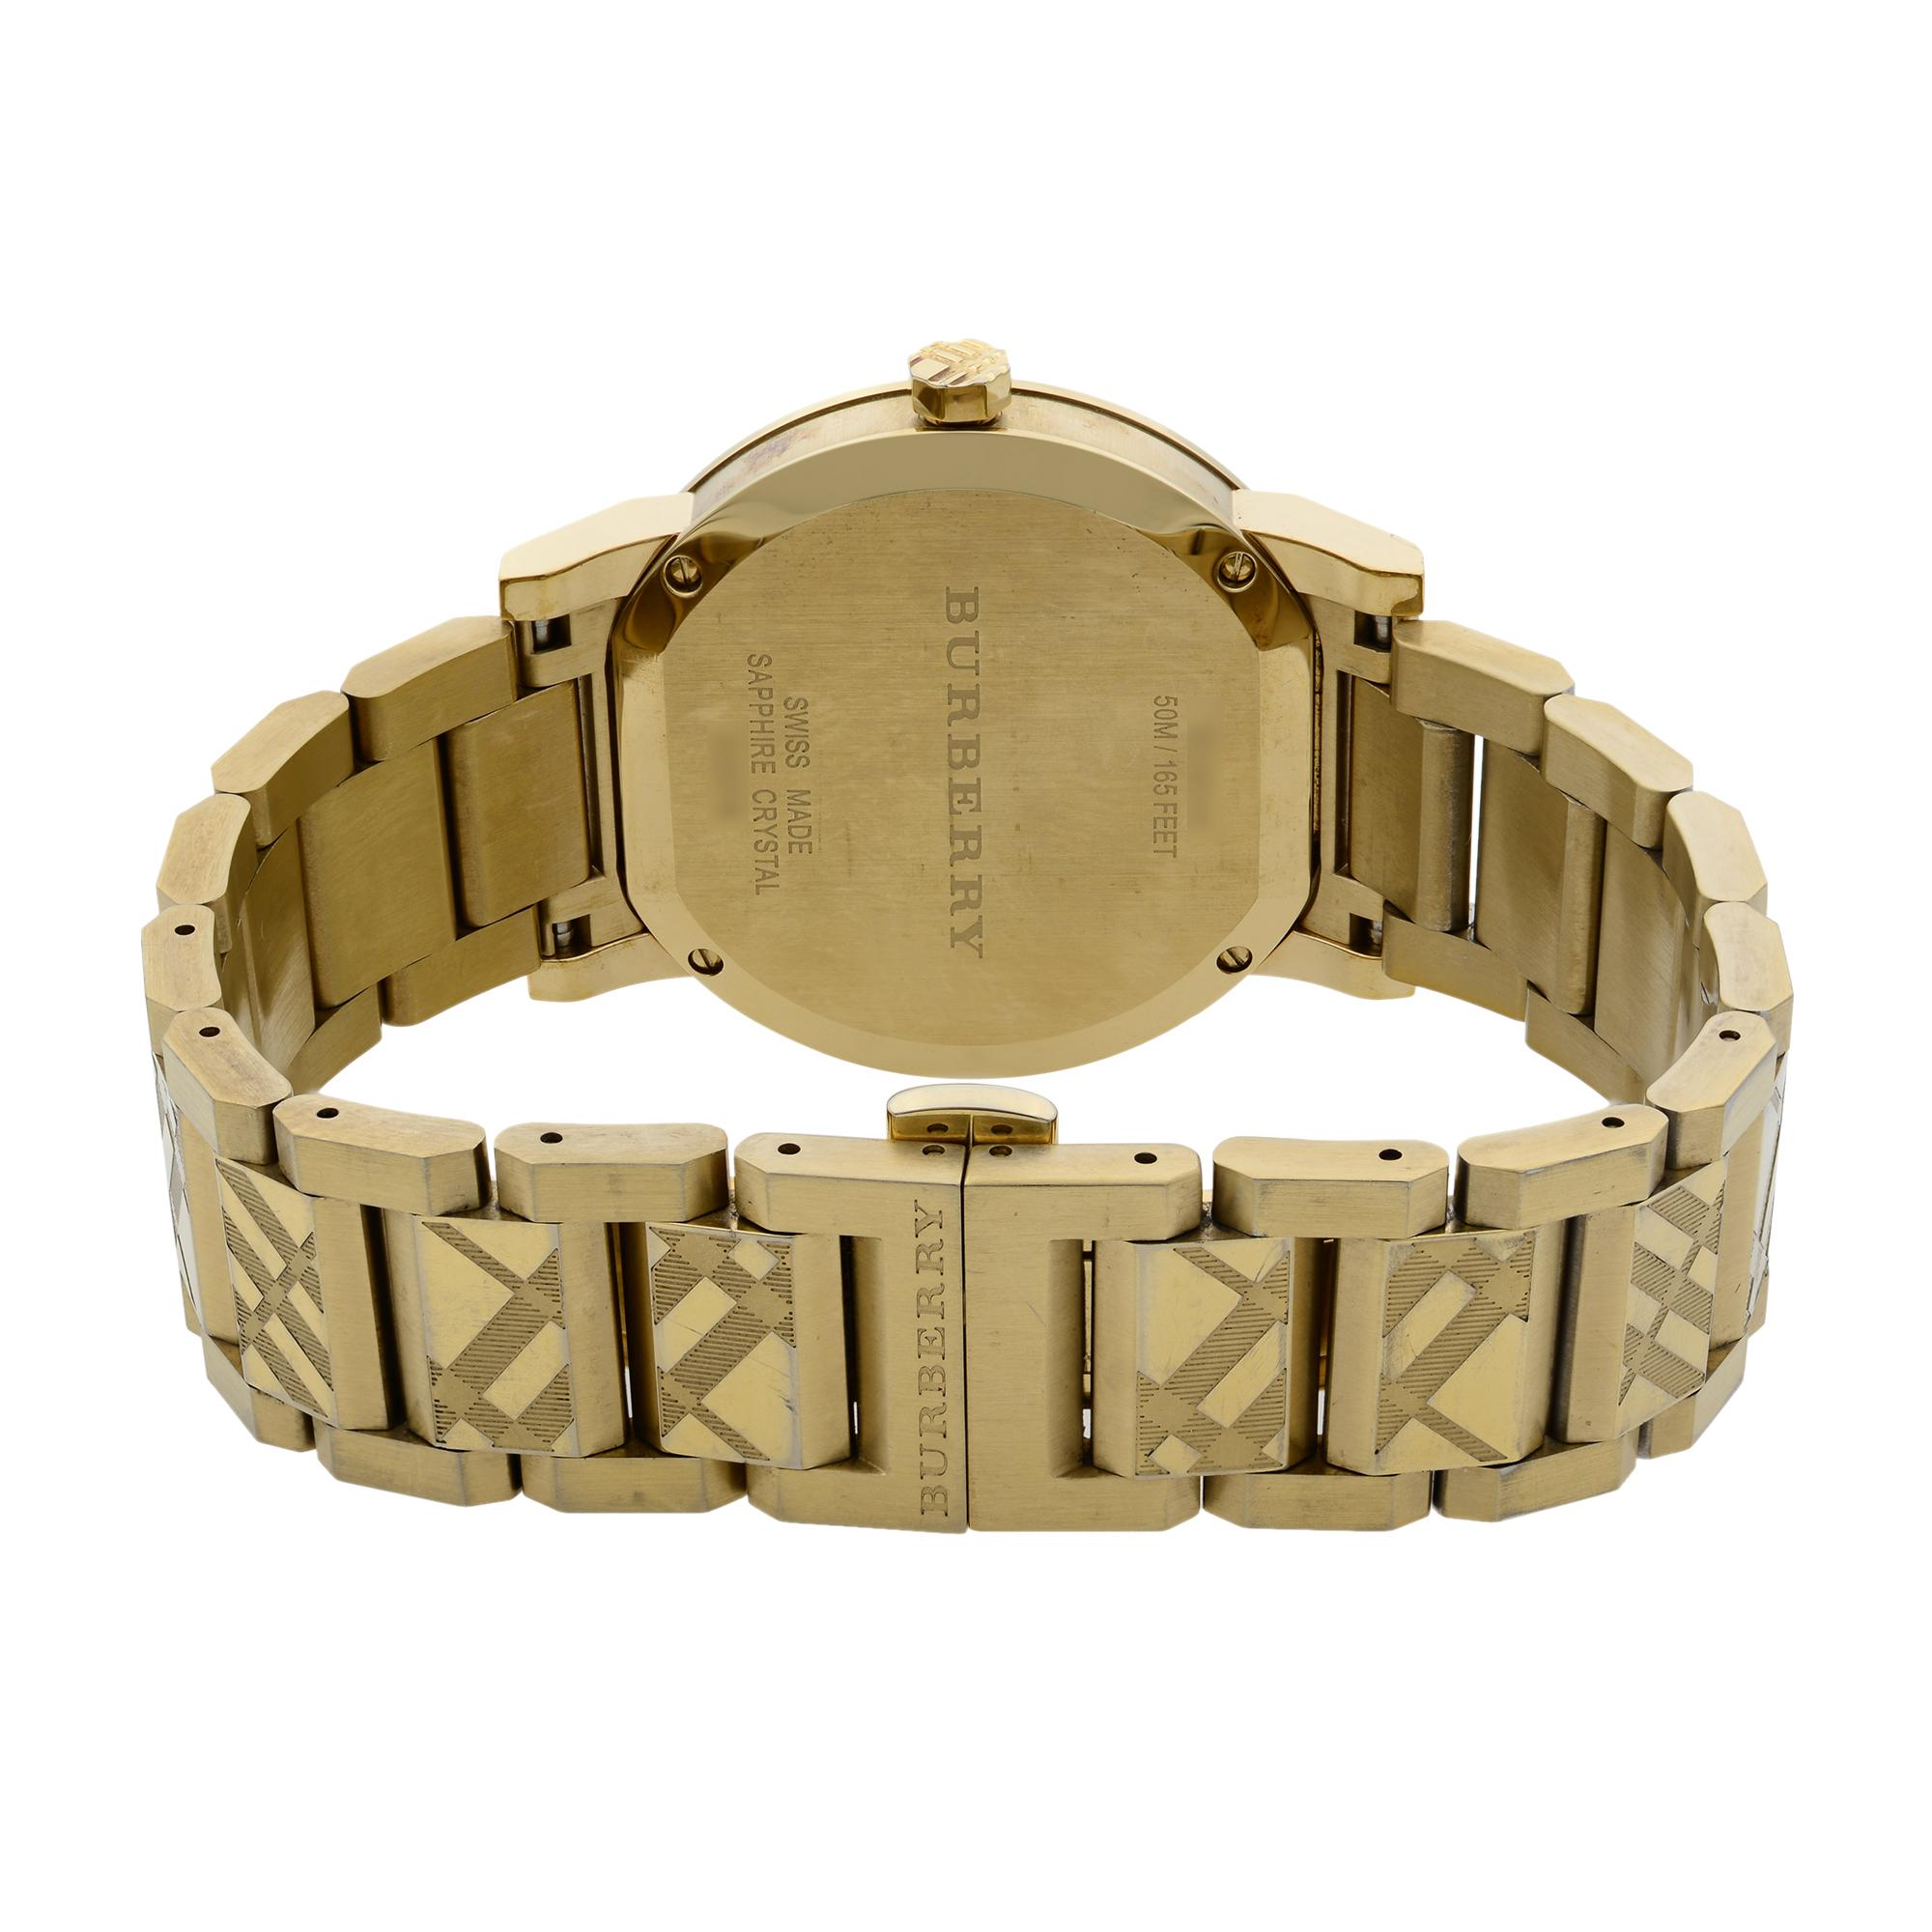 Burberry Gold Ion-Plated Stainless Steel Gold Dial Quartz Unisex Watch BU9038 2